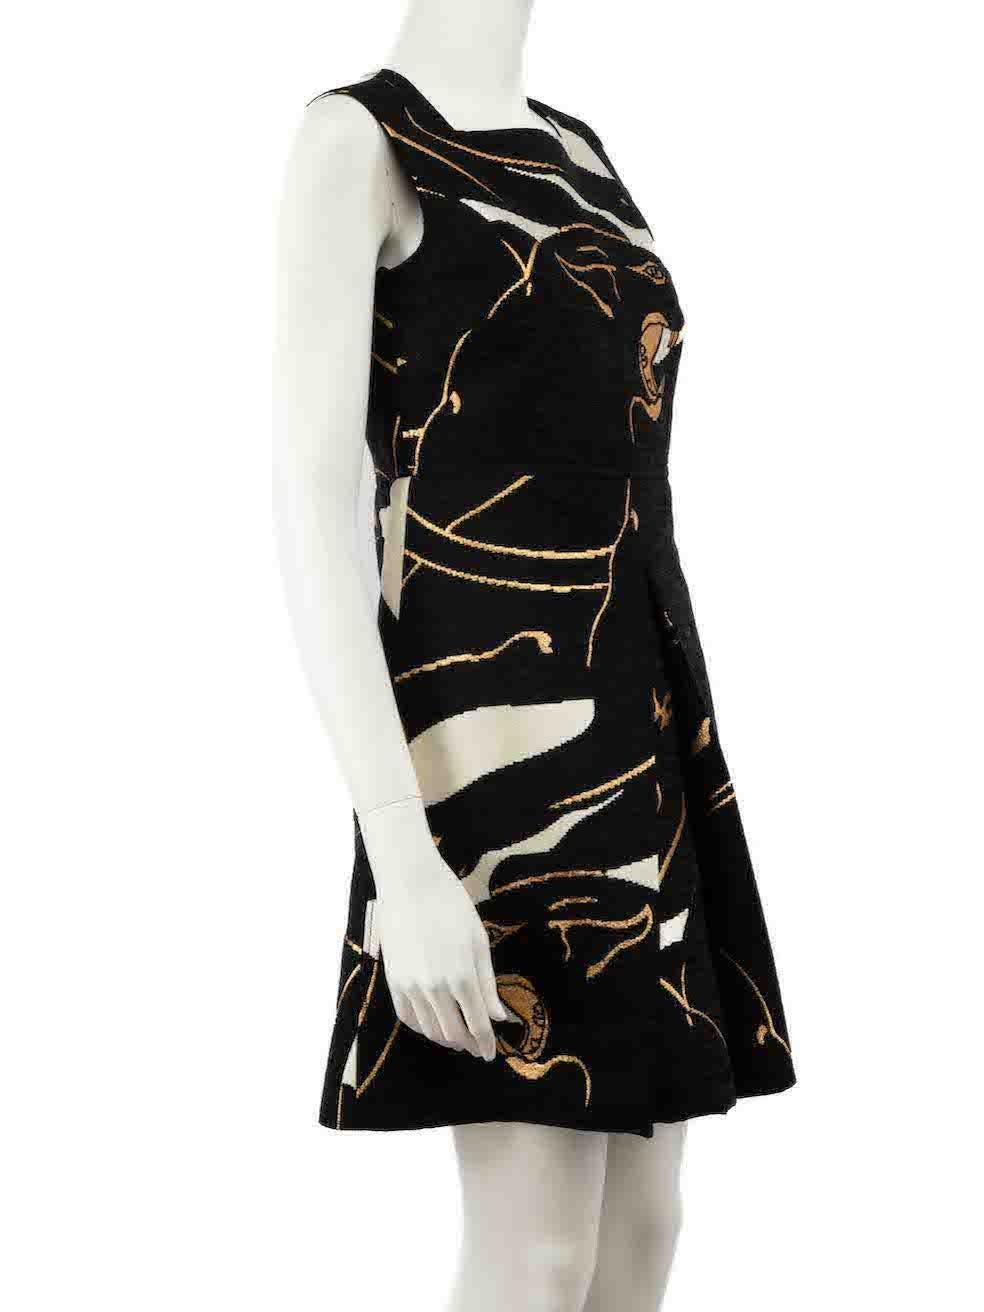 CONDITION is Very good. Minimal wear to dress is evident. Minimal wear to the front with pulls to the weave on this used Valentino designer resale item.
 
 Details
 Black
 Polyester
 Dress
 Jacquard panther pattern
 Gold metallic detail
 Sleeveless
